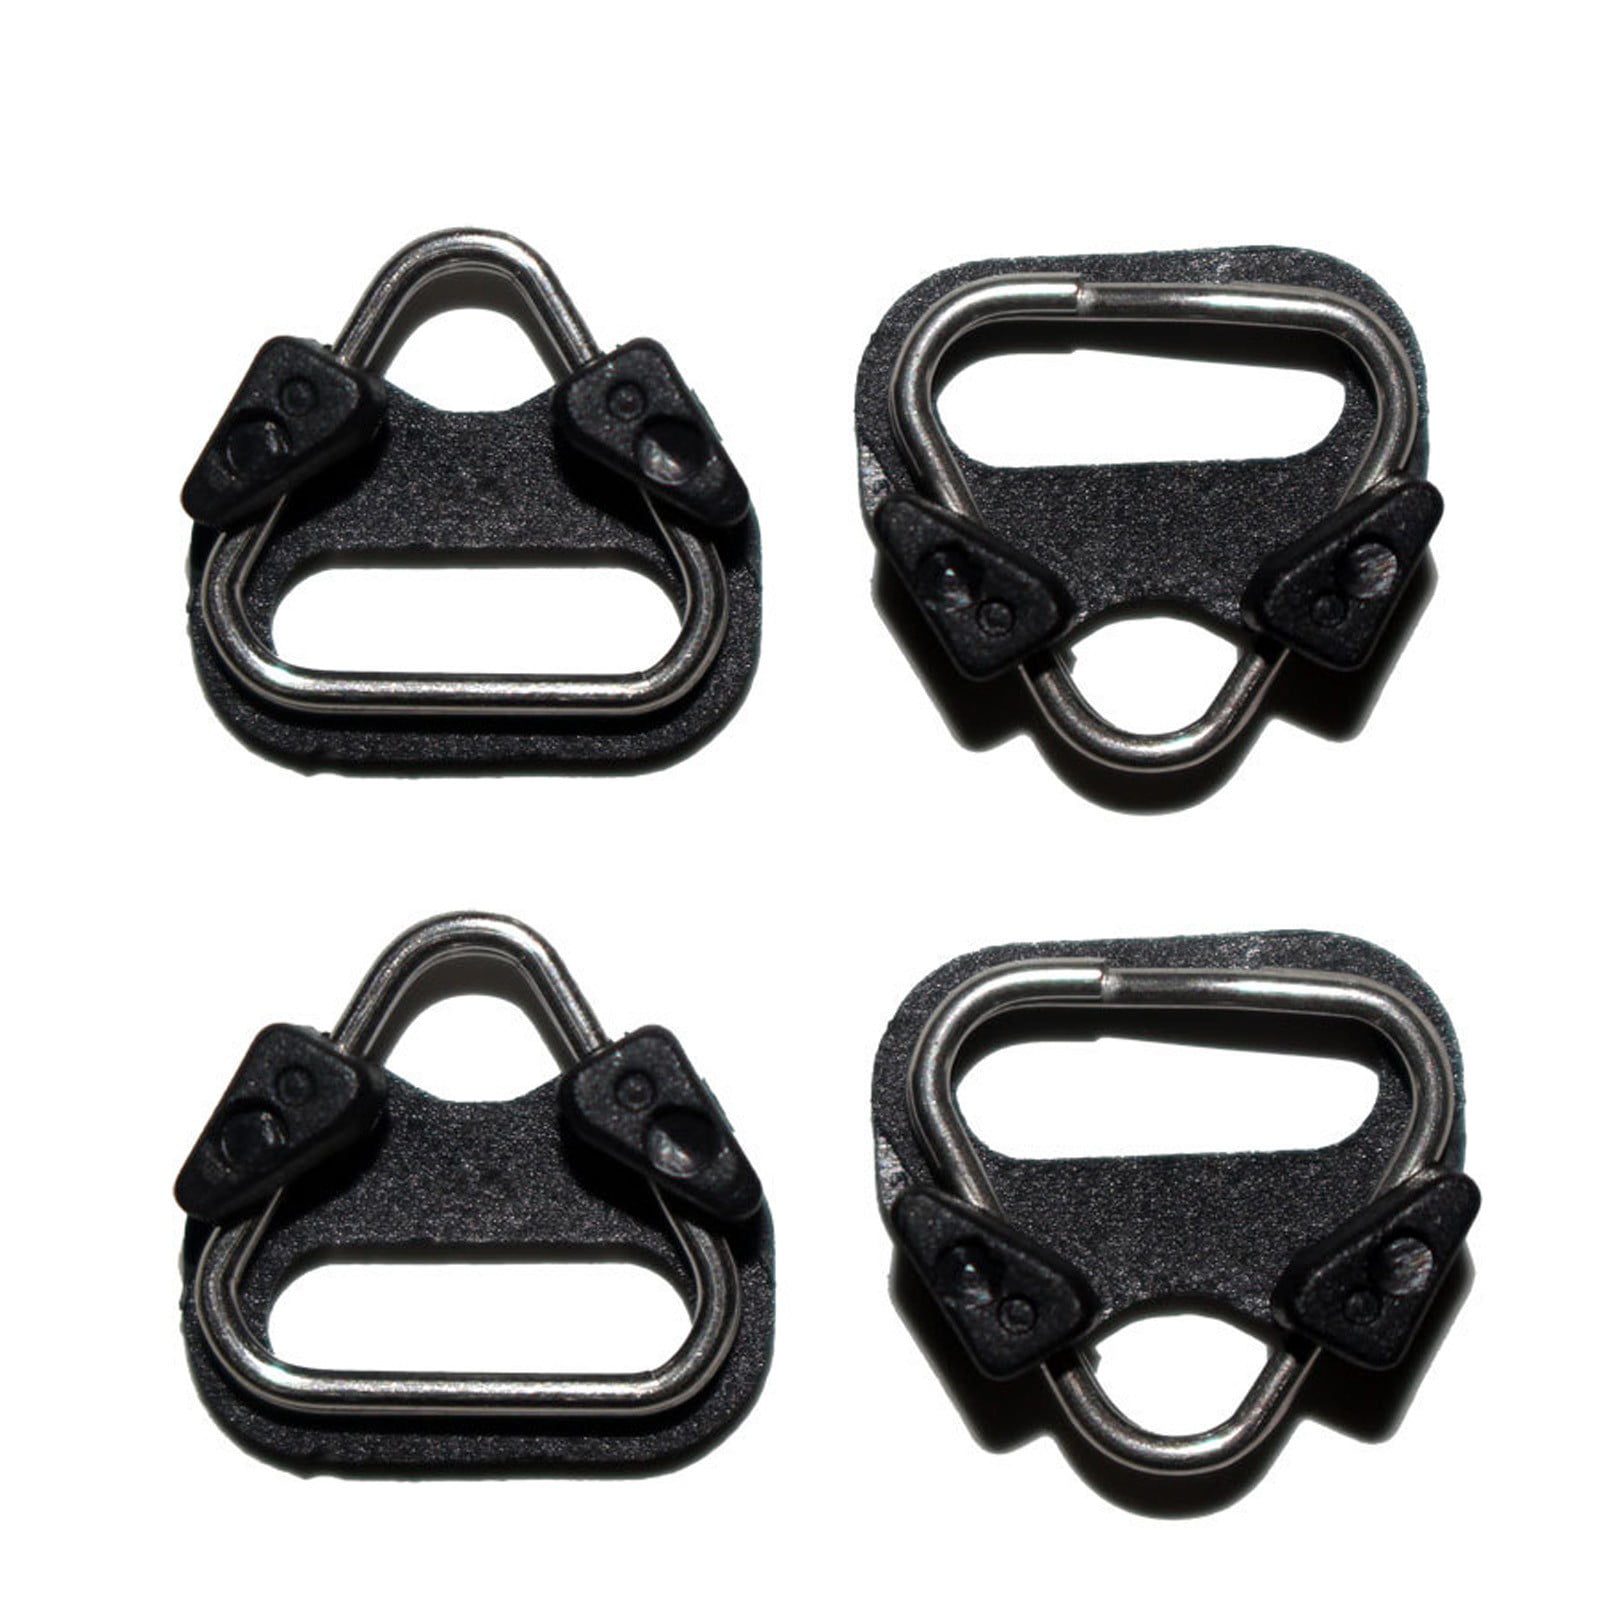 4x Camera Strap Triangle Split Ring Adapter With Plastic Cap NEW 